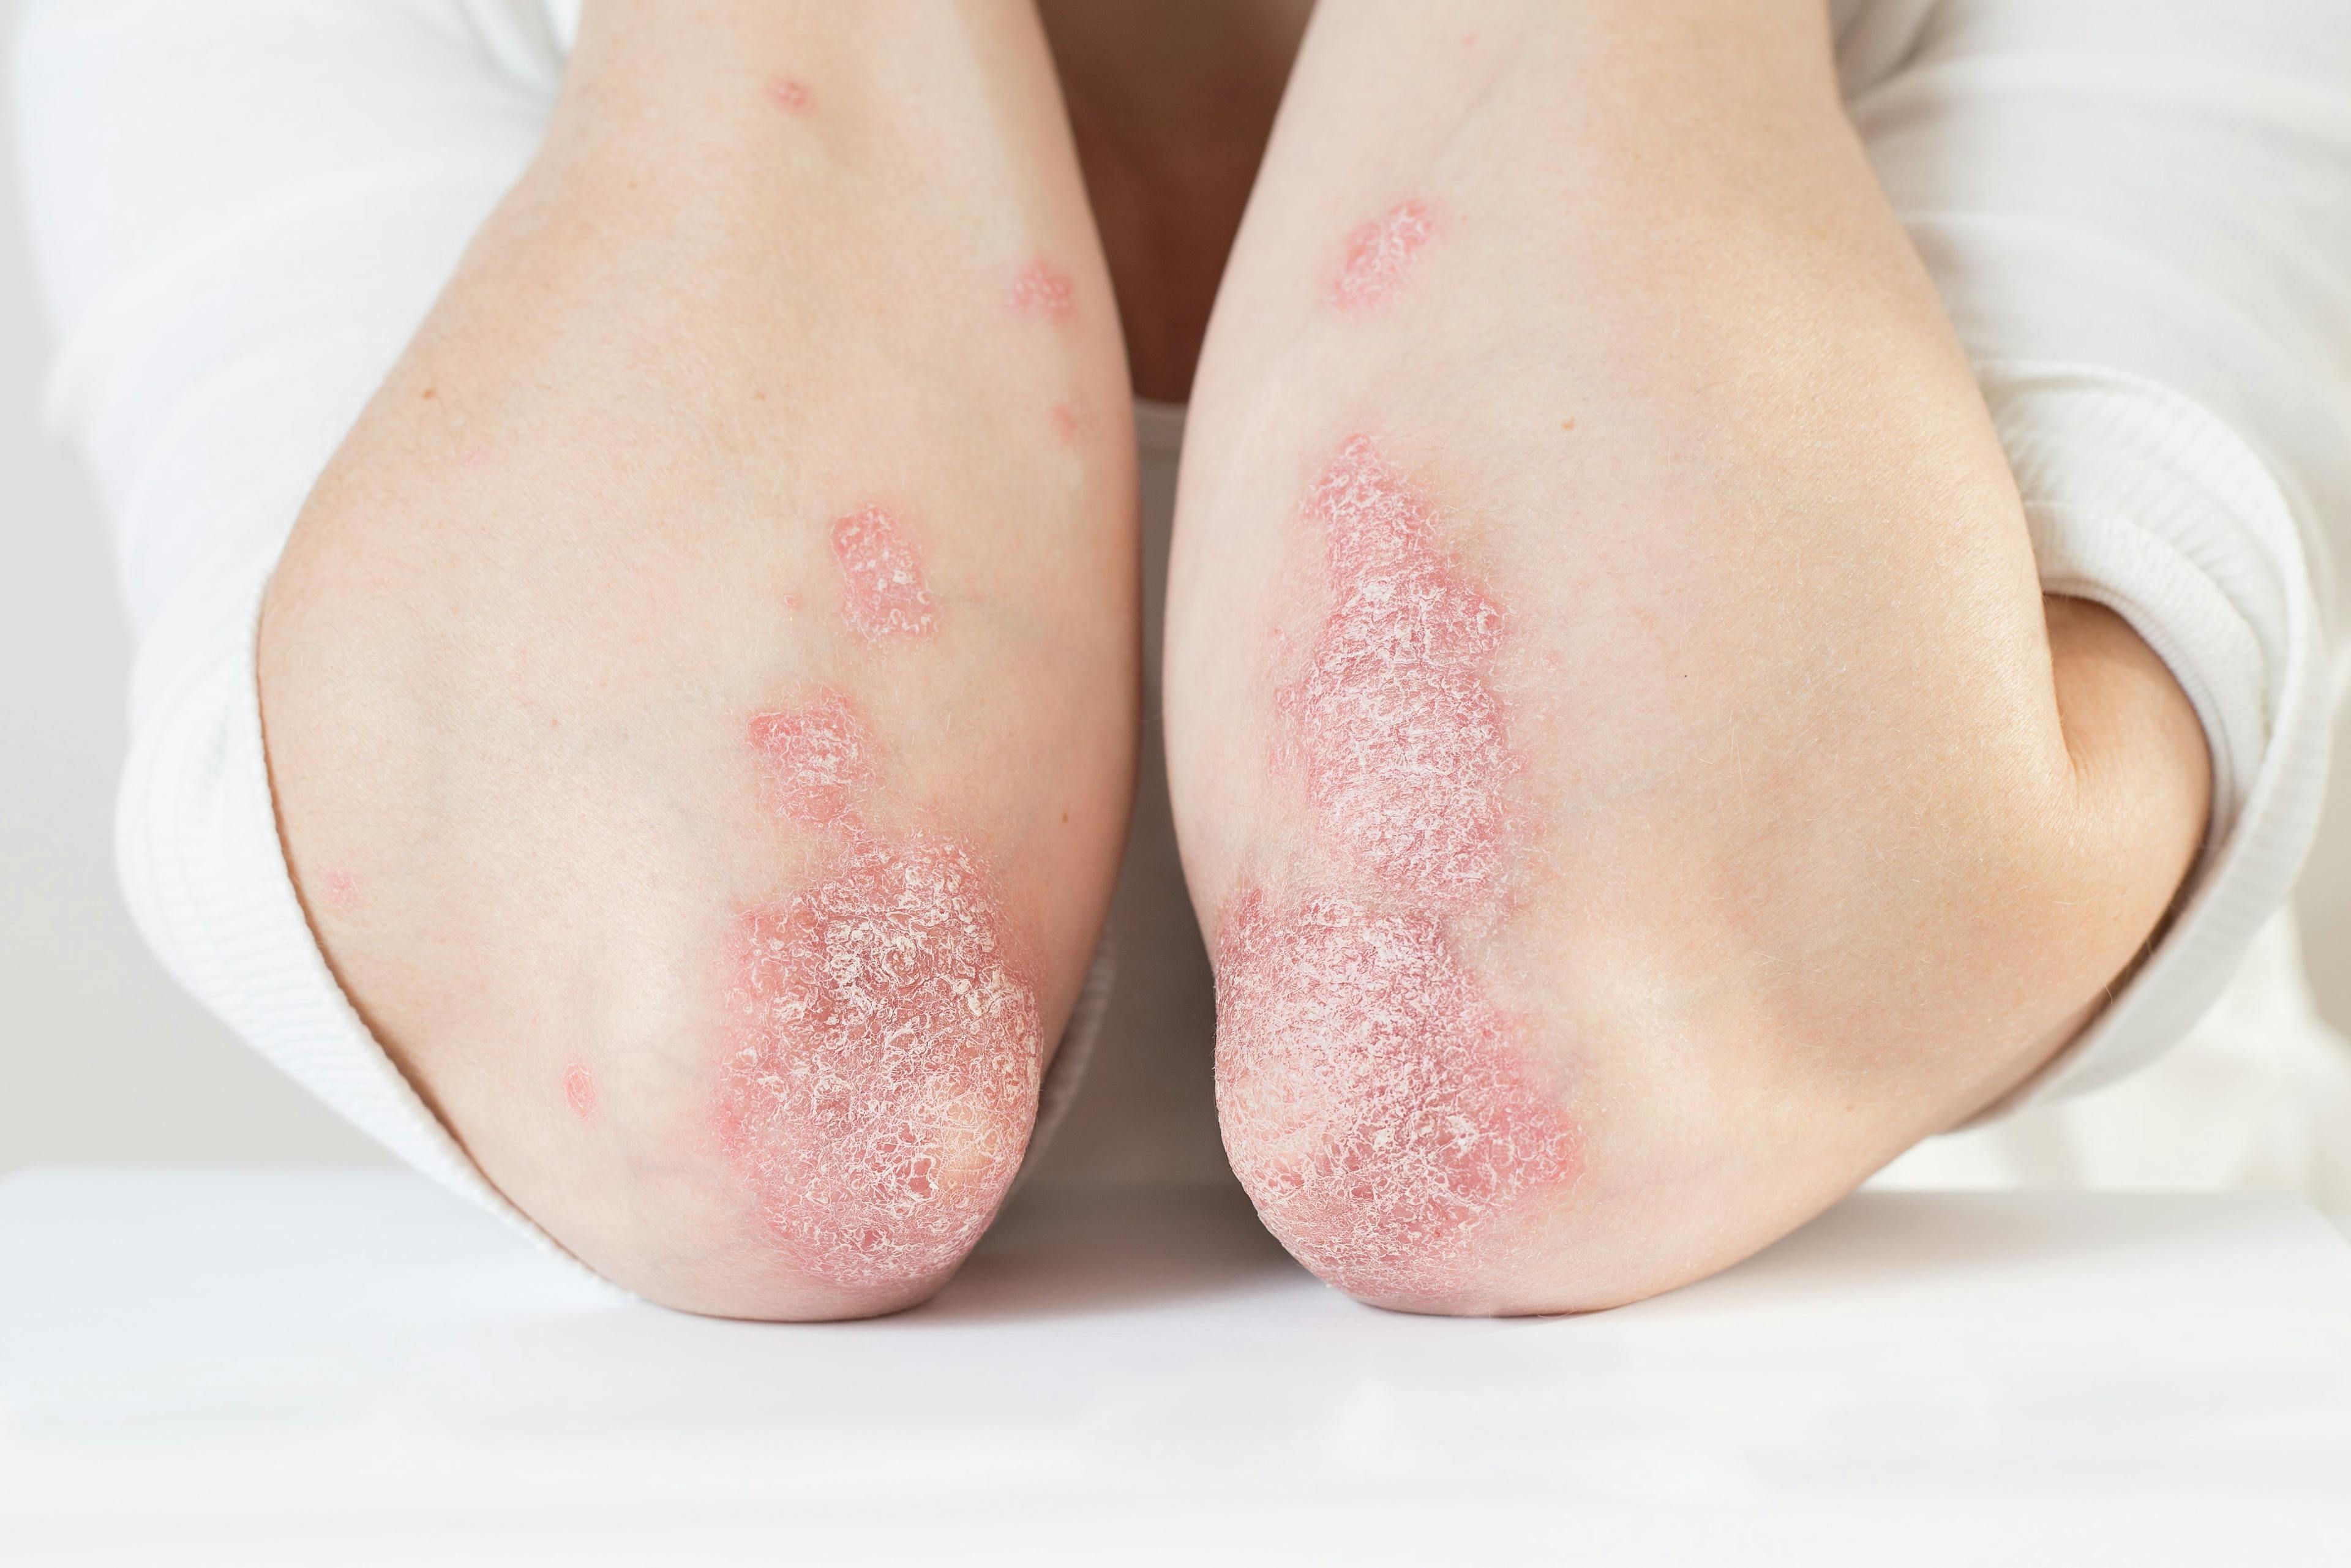 No risk of outpatient infections identified for pediatric psoriasis patients starting ustekinumab